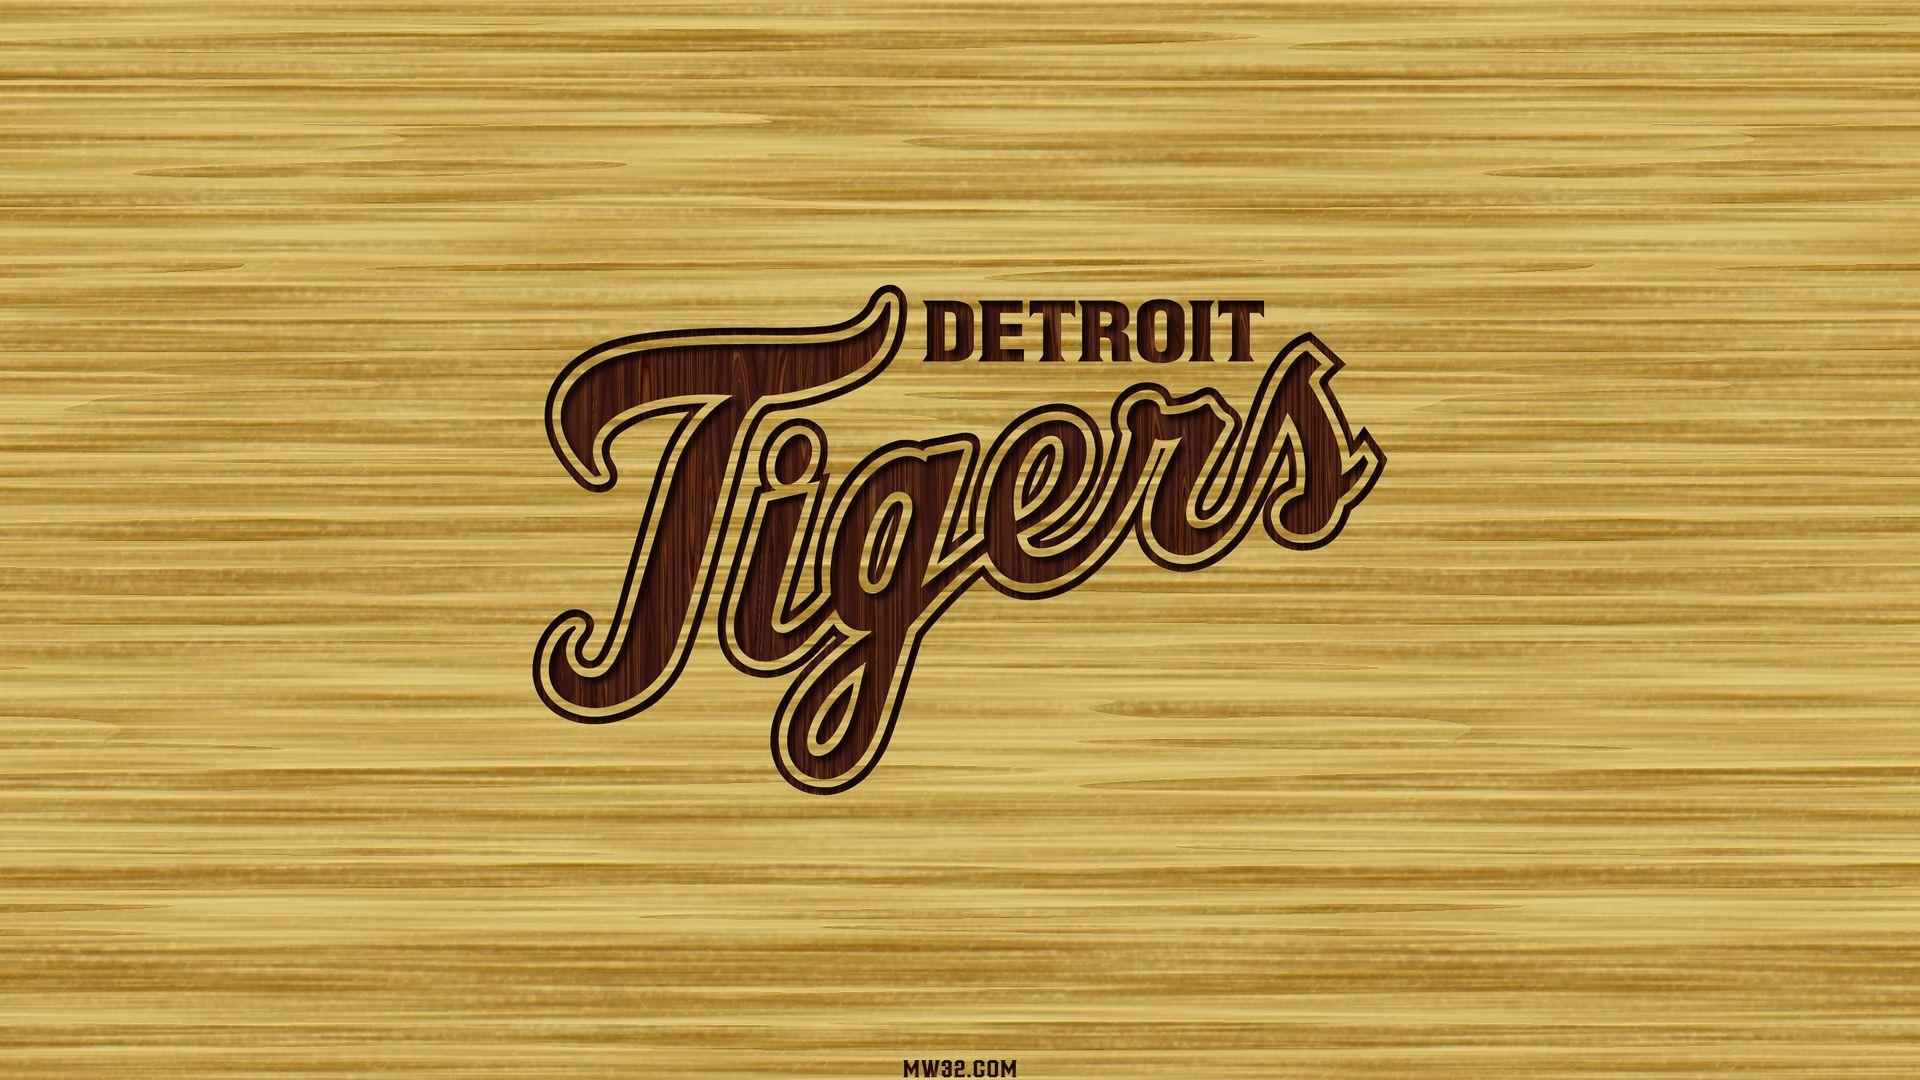 In Gallery: Detroit Tigers Wallpapers, 38 Detroit Tigers HD